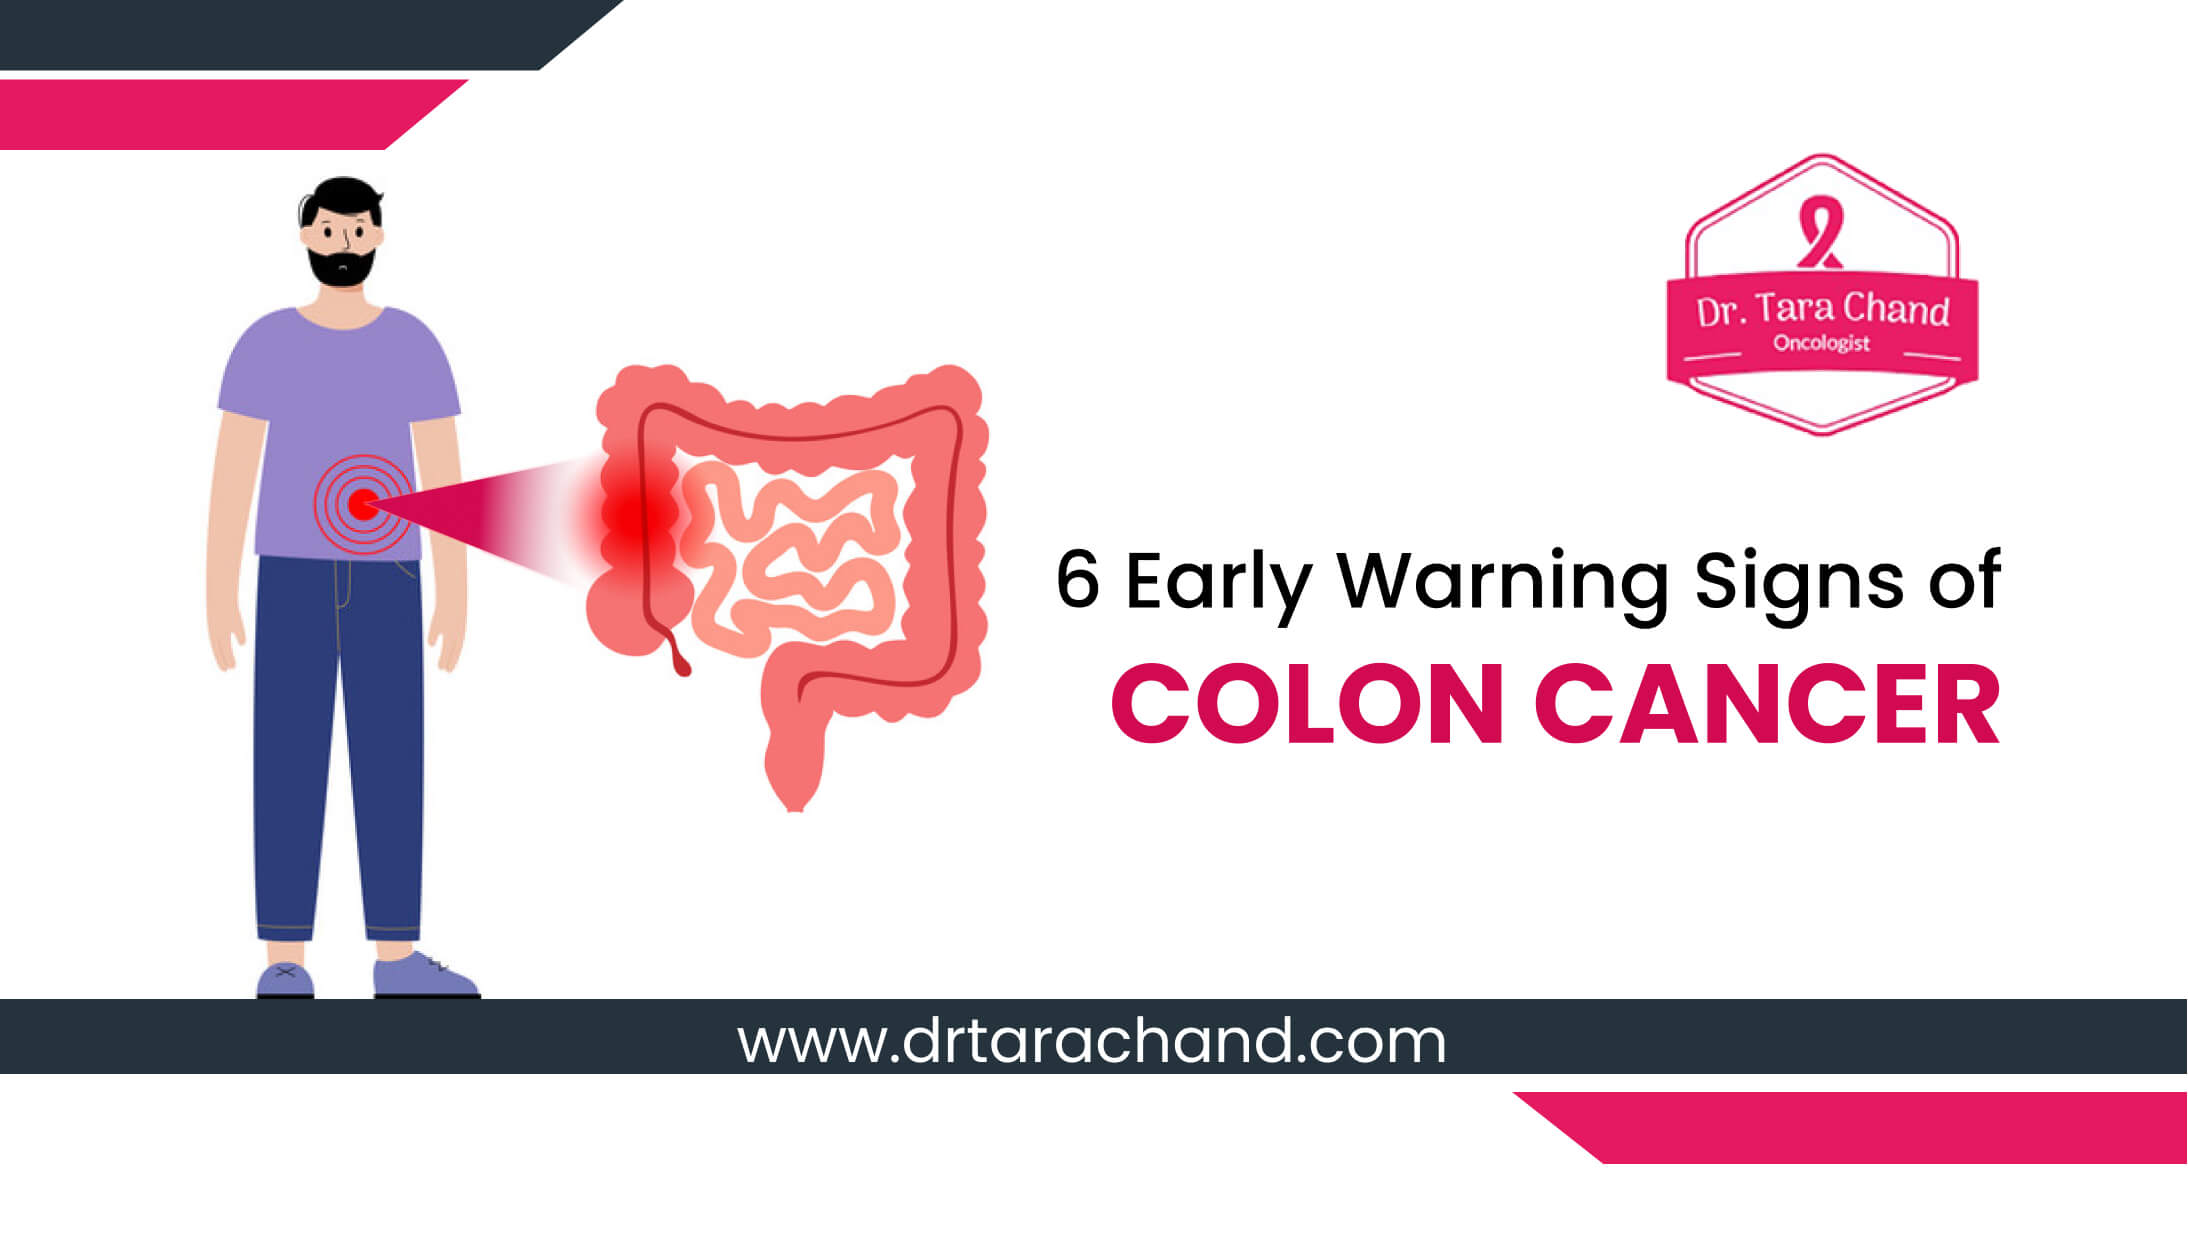 6 Early Warning Signs of Colon Cancer